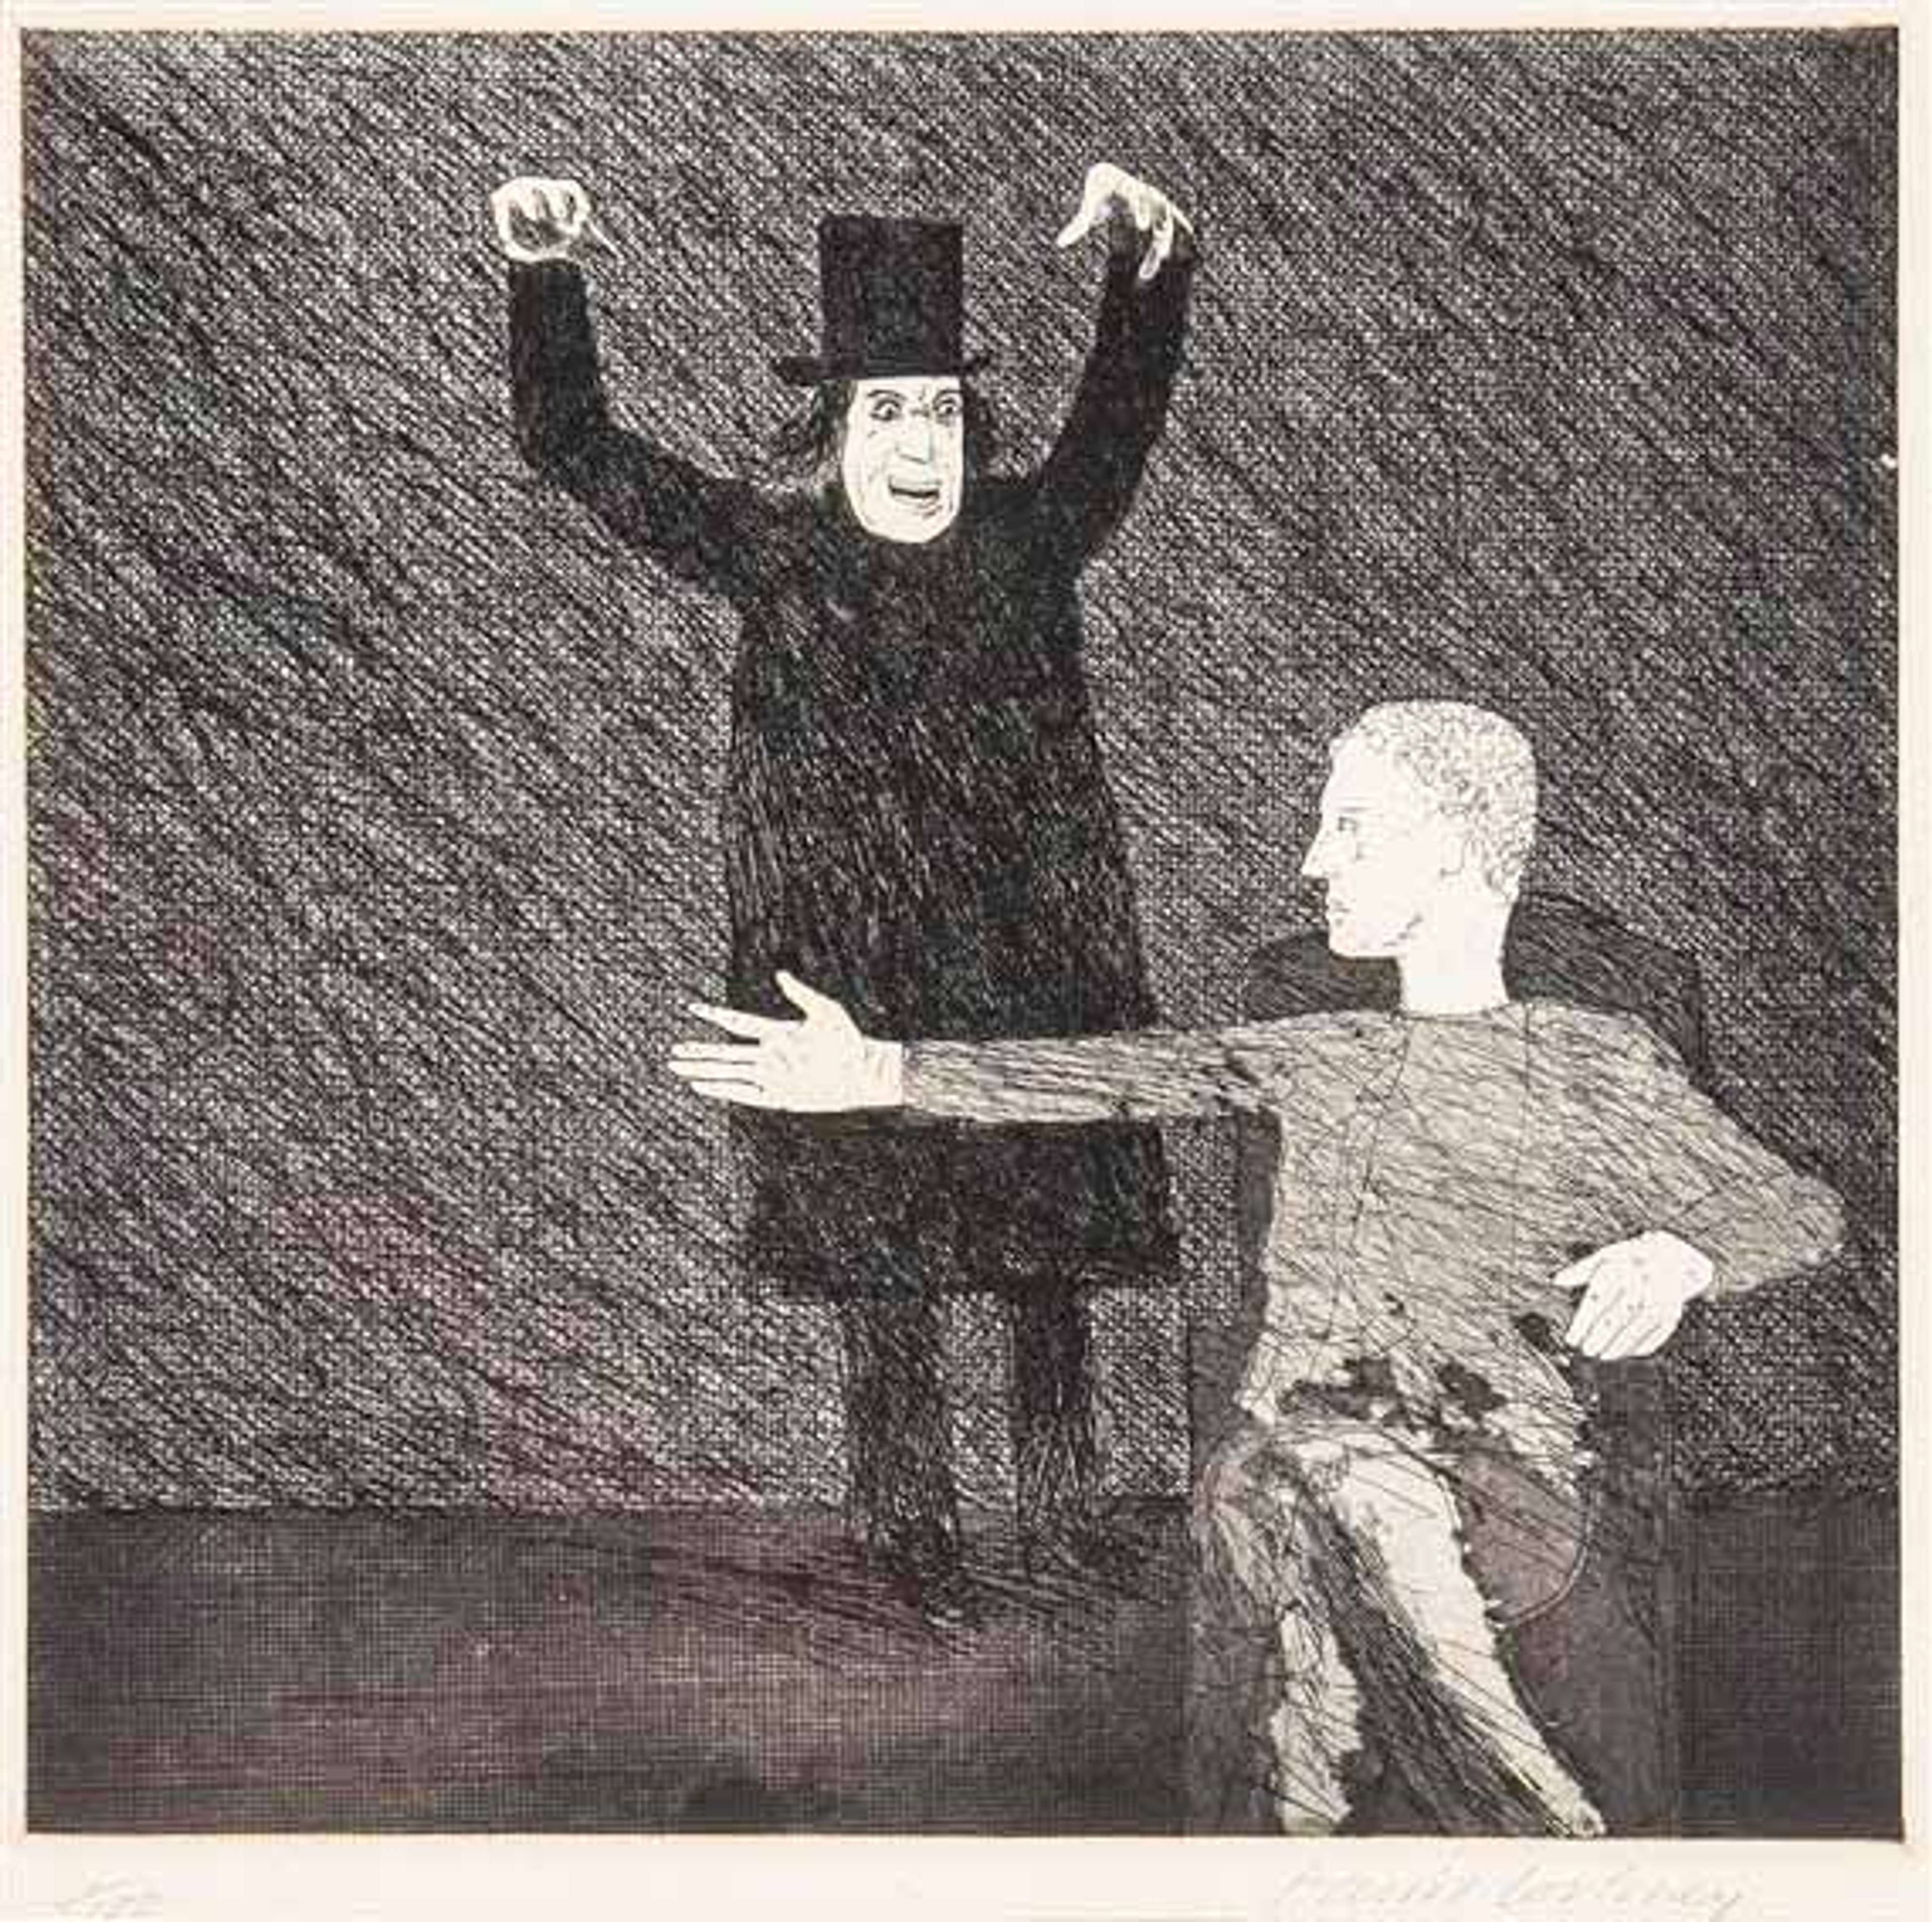 David Hockney’s Inside The Castle. An intaglio print of a man wearing a black coat and hat with his arms raised, trying to scare the man seated in front of him. 